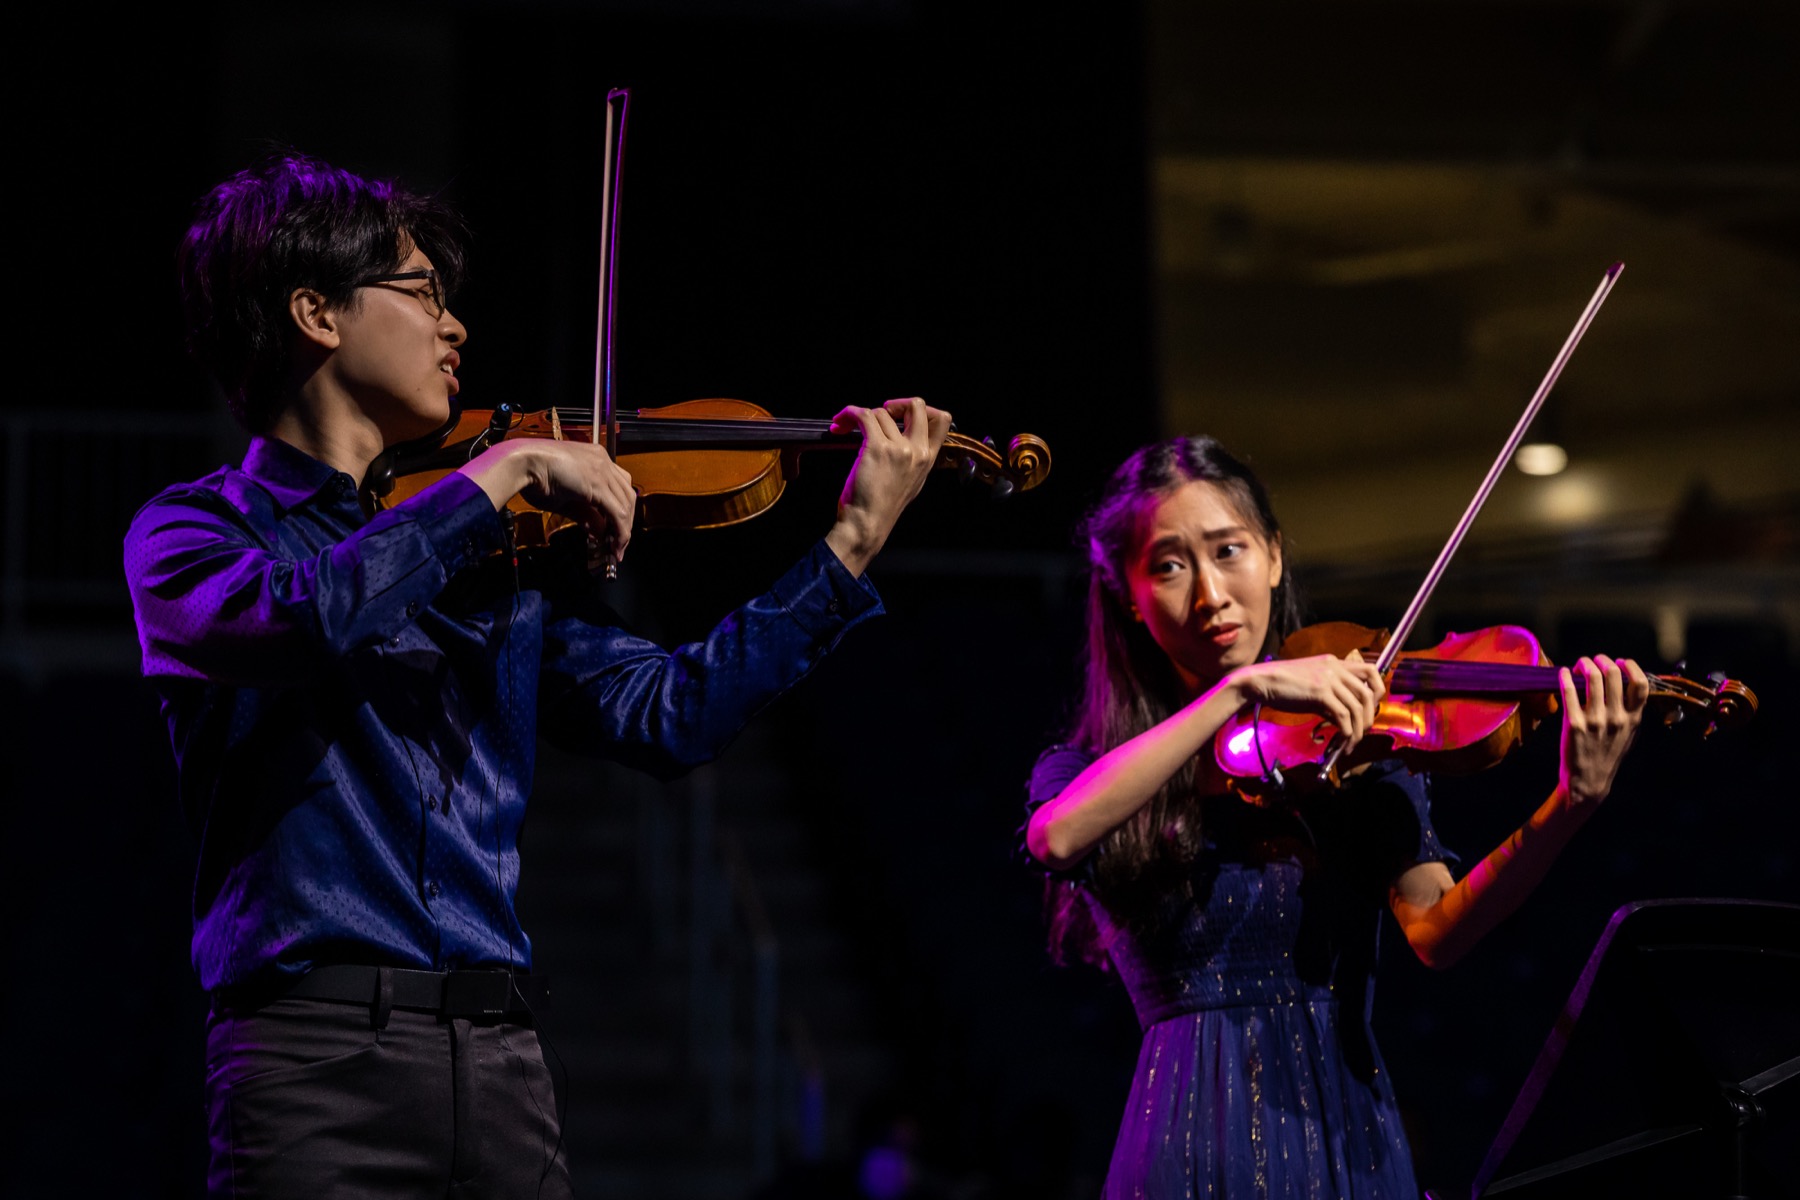 Peter Lin, a member of the School of Music Class of 2022 and Joanne Lin, Class of 2025, performed a sibling duet during the commencement ceremony.